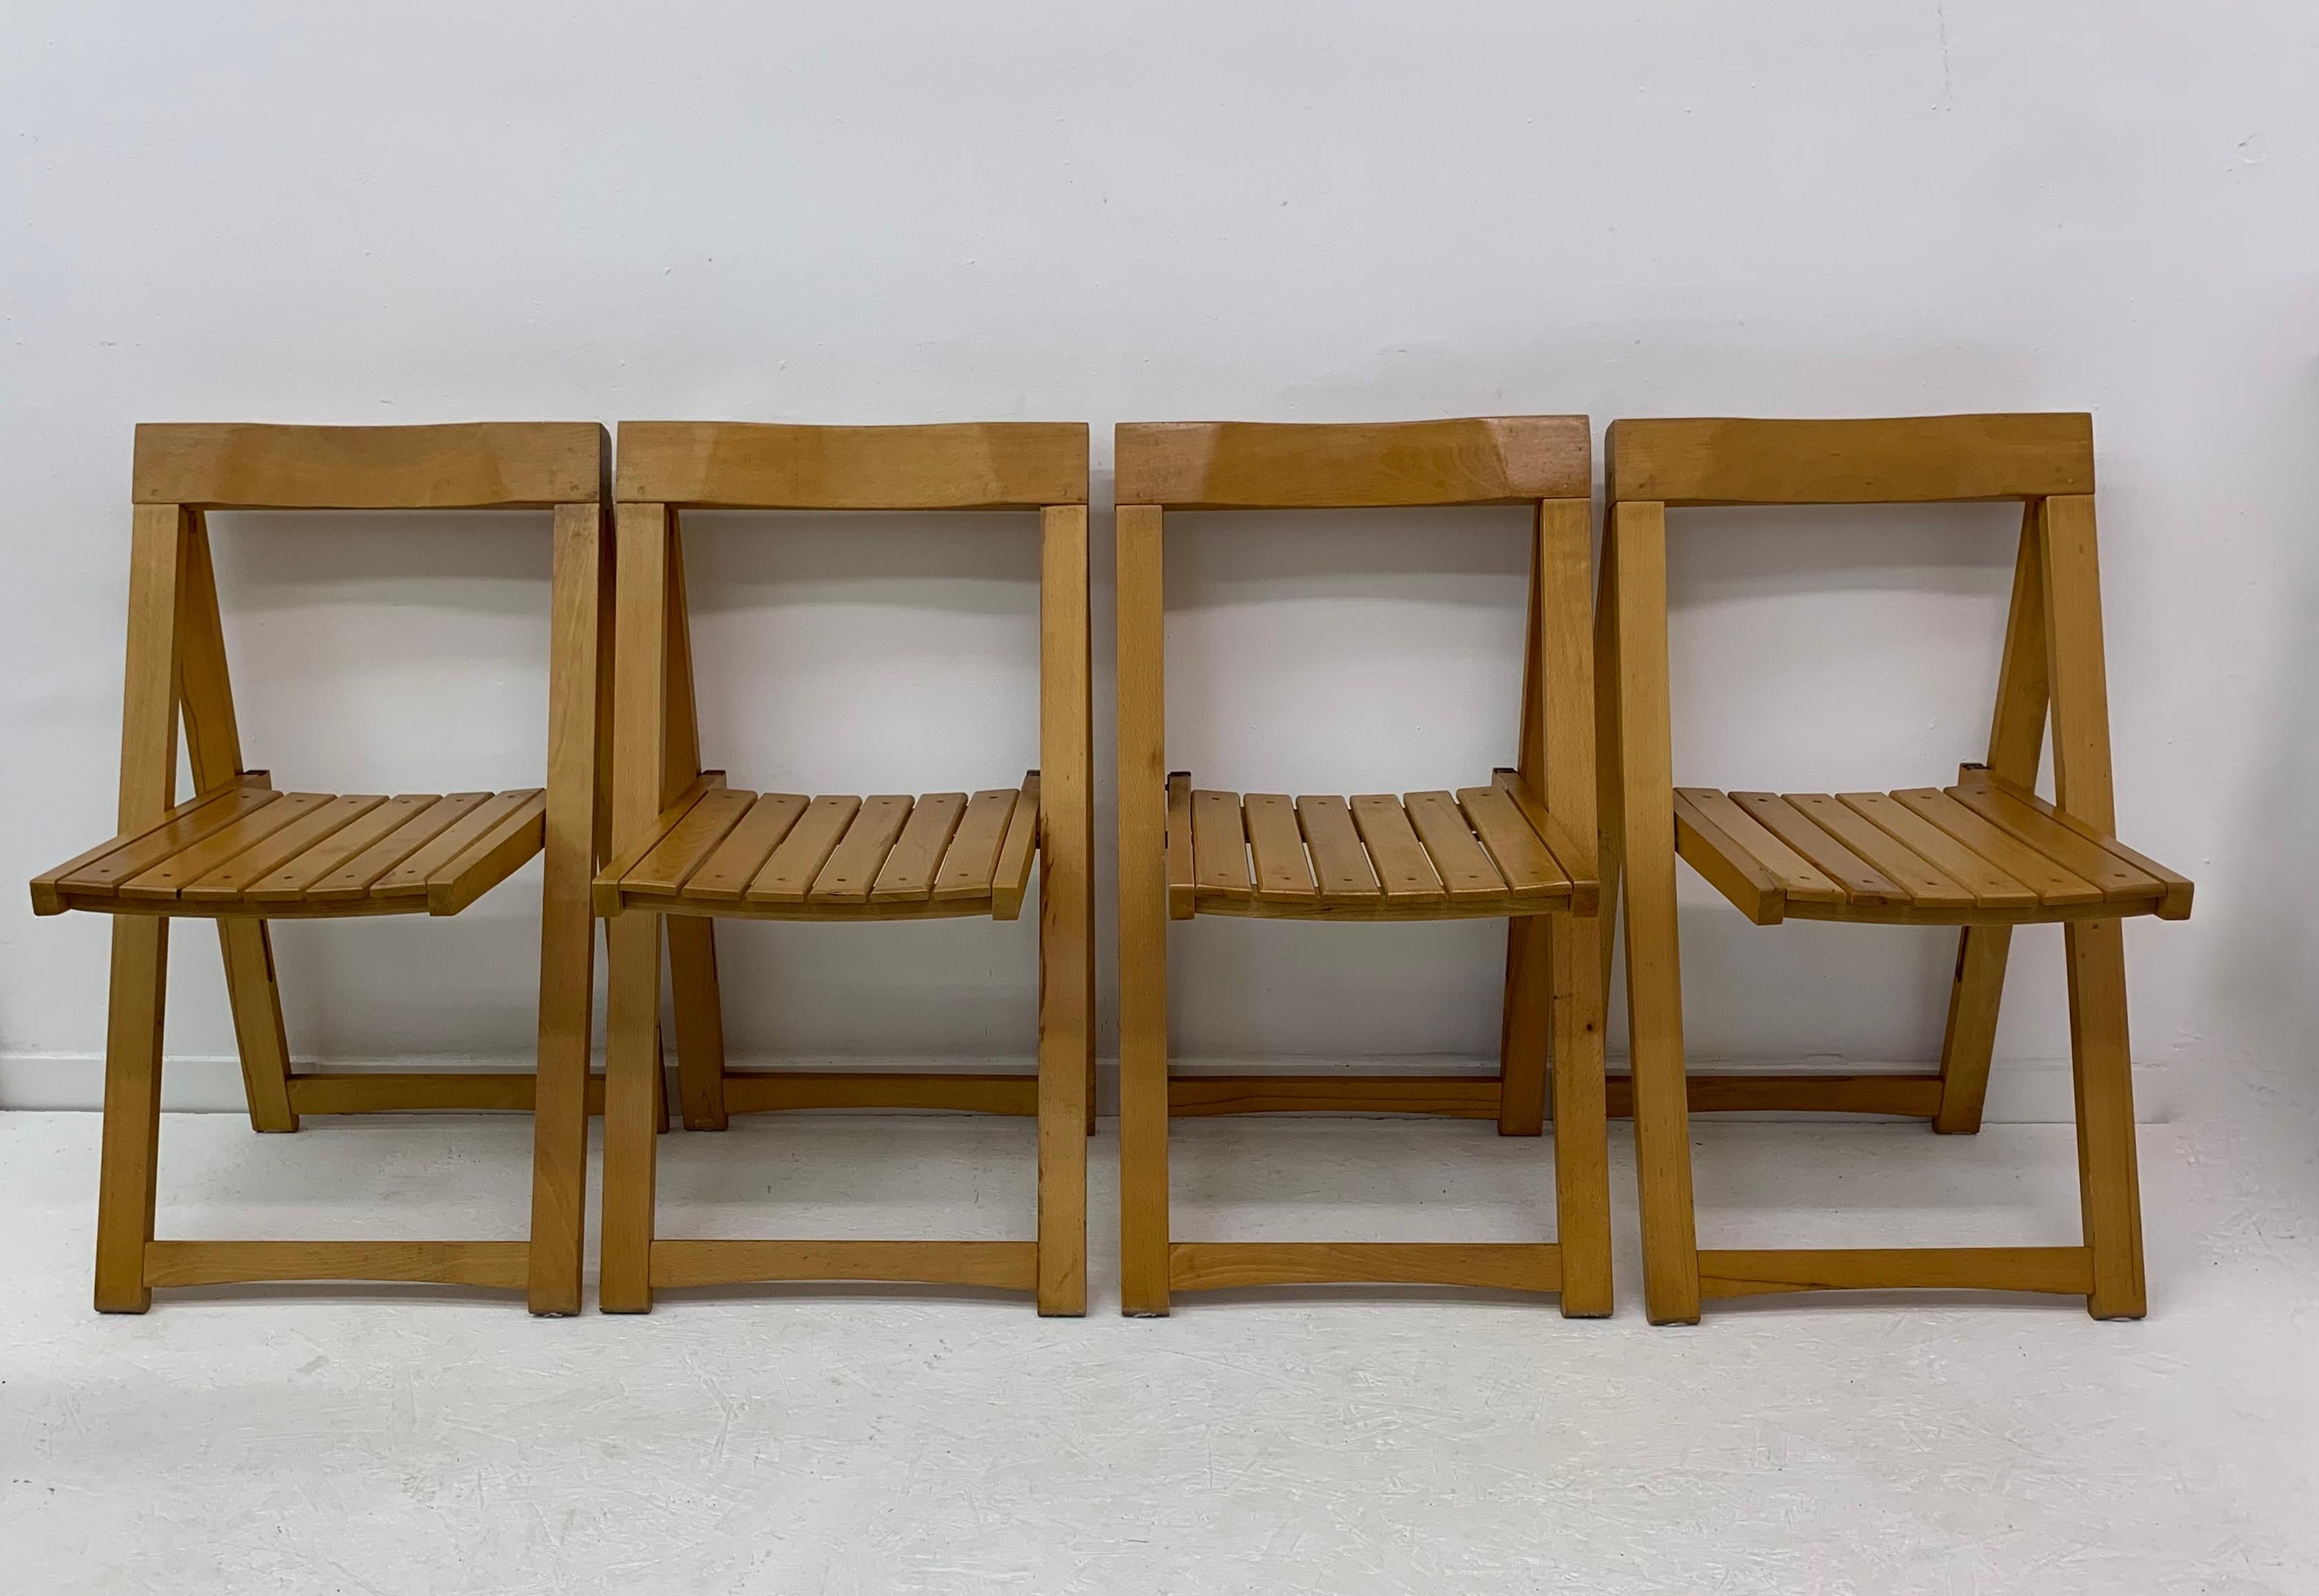 Mid-20th Century Set of 4 Aldo Jacober for Alberto Bazzani folding chairs, 1960’s For Sale